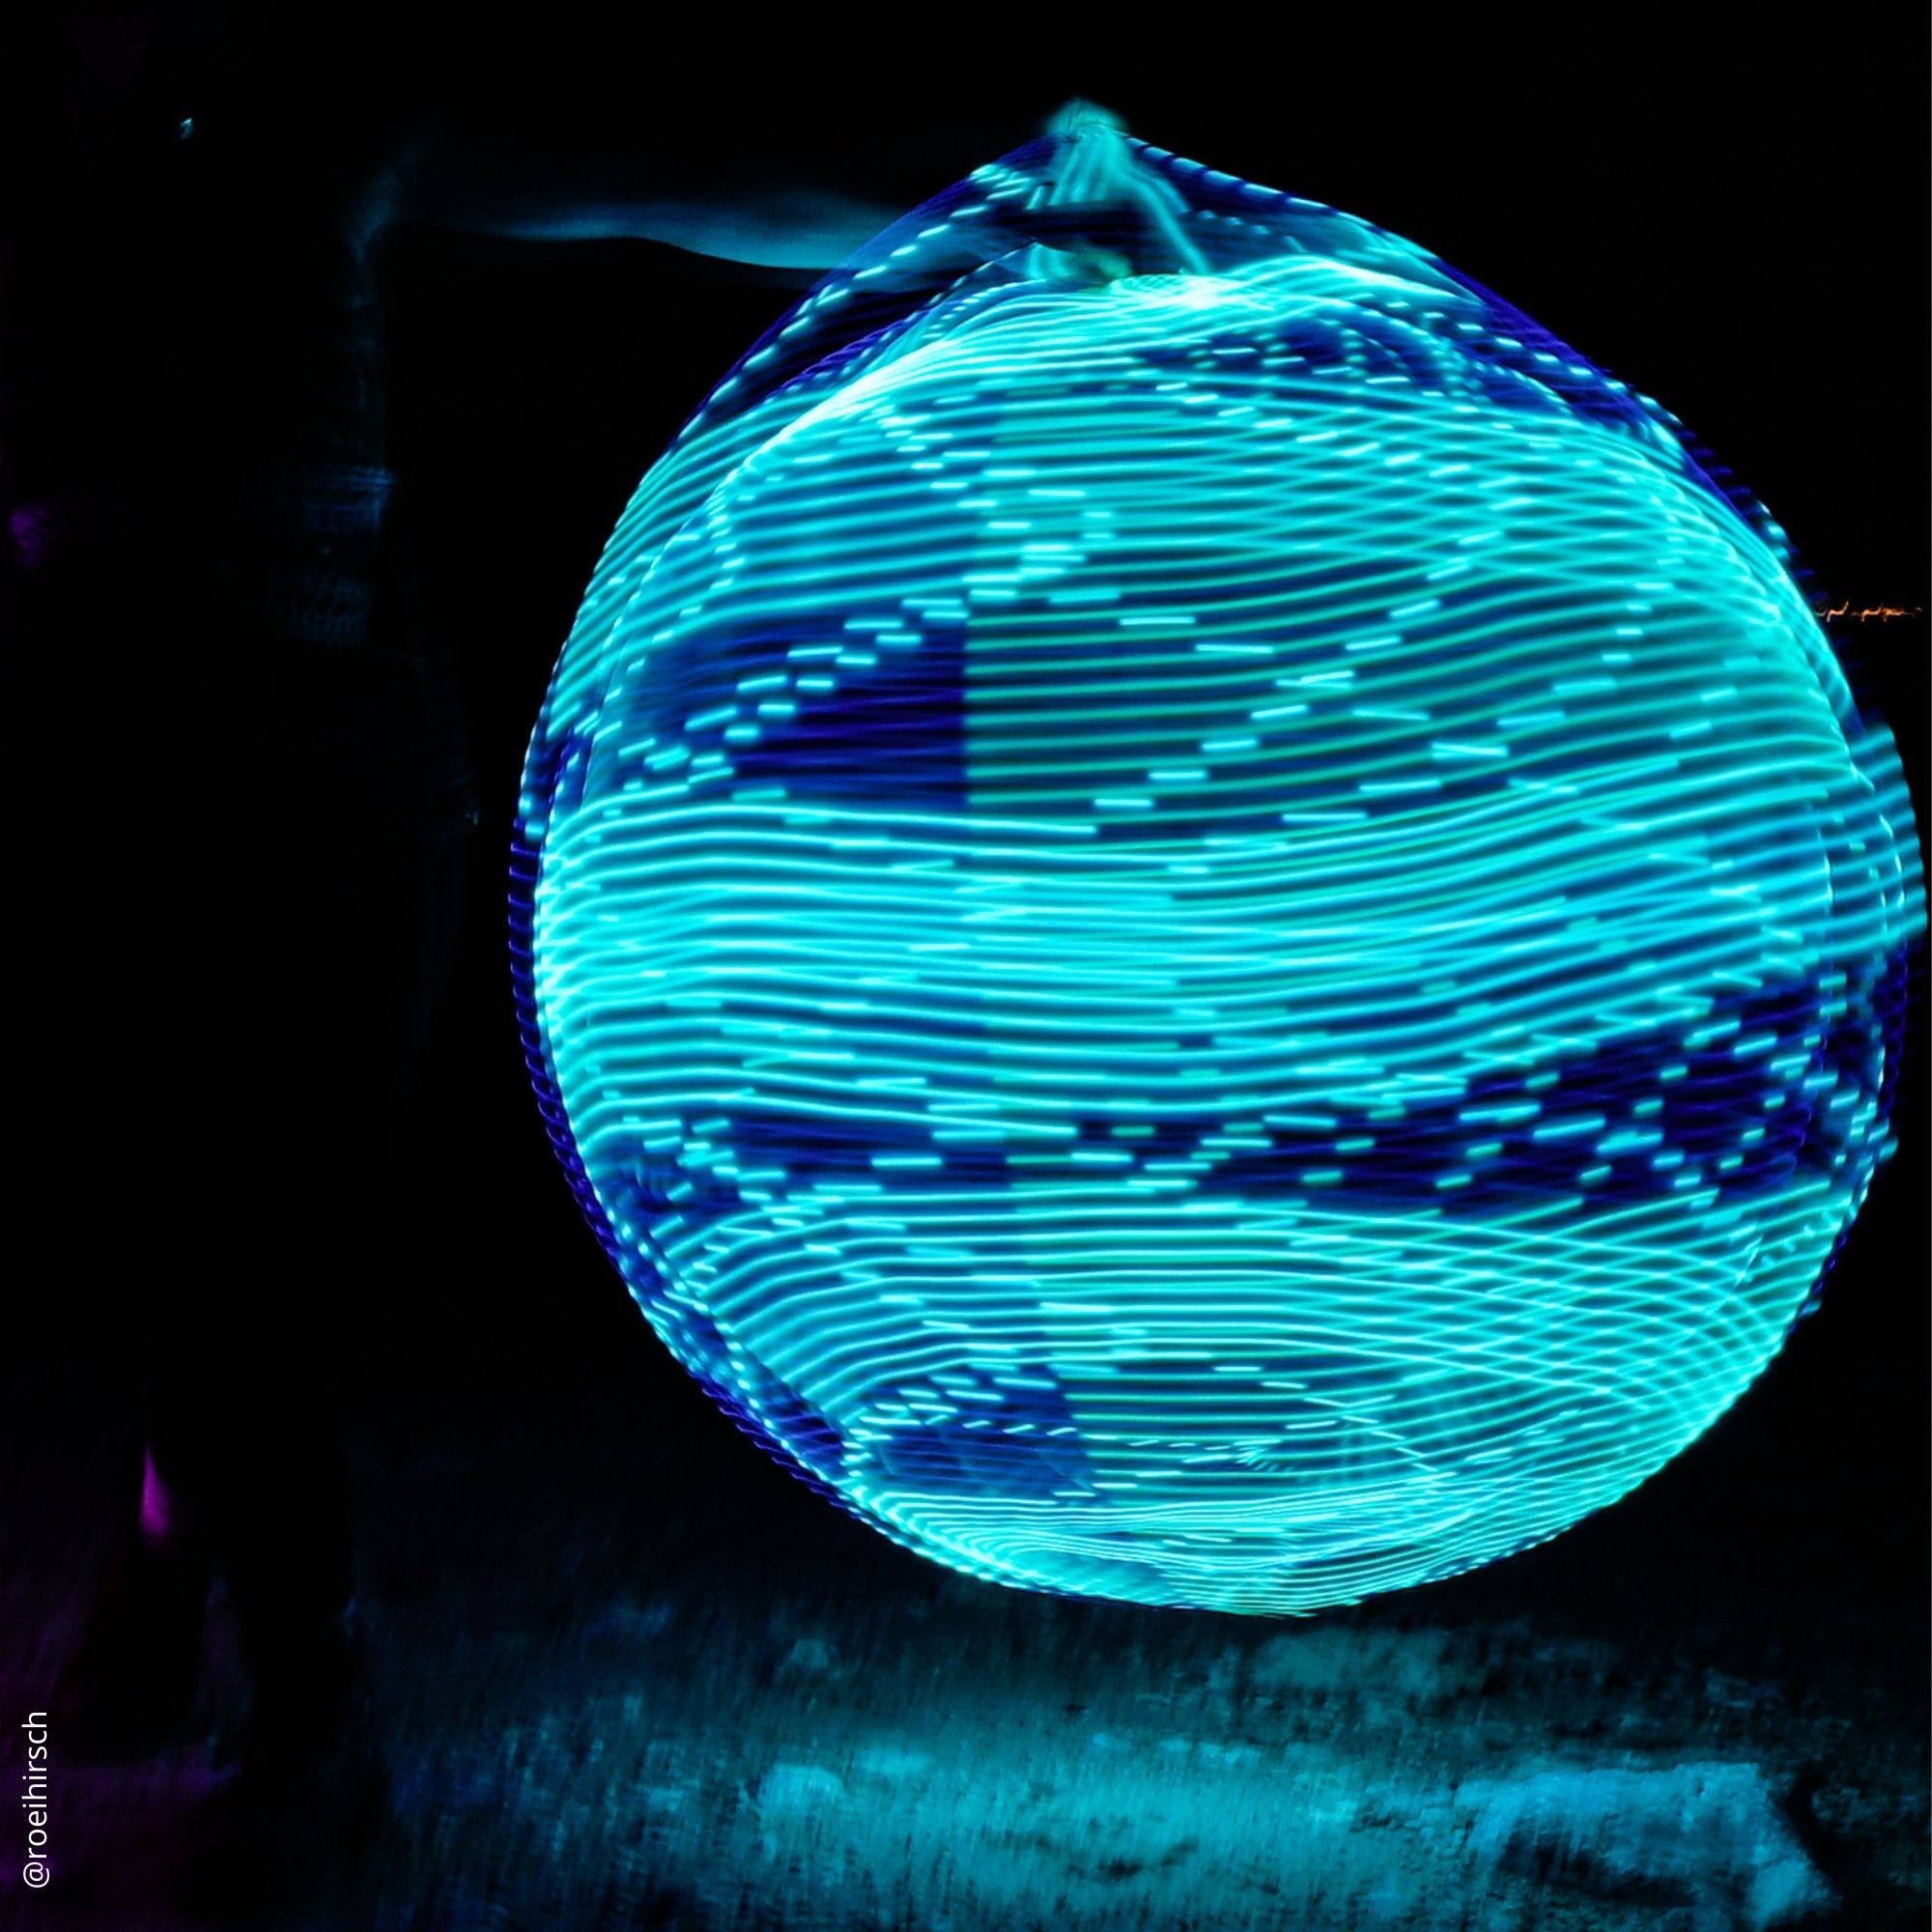 hoop spinning with light trails